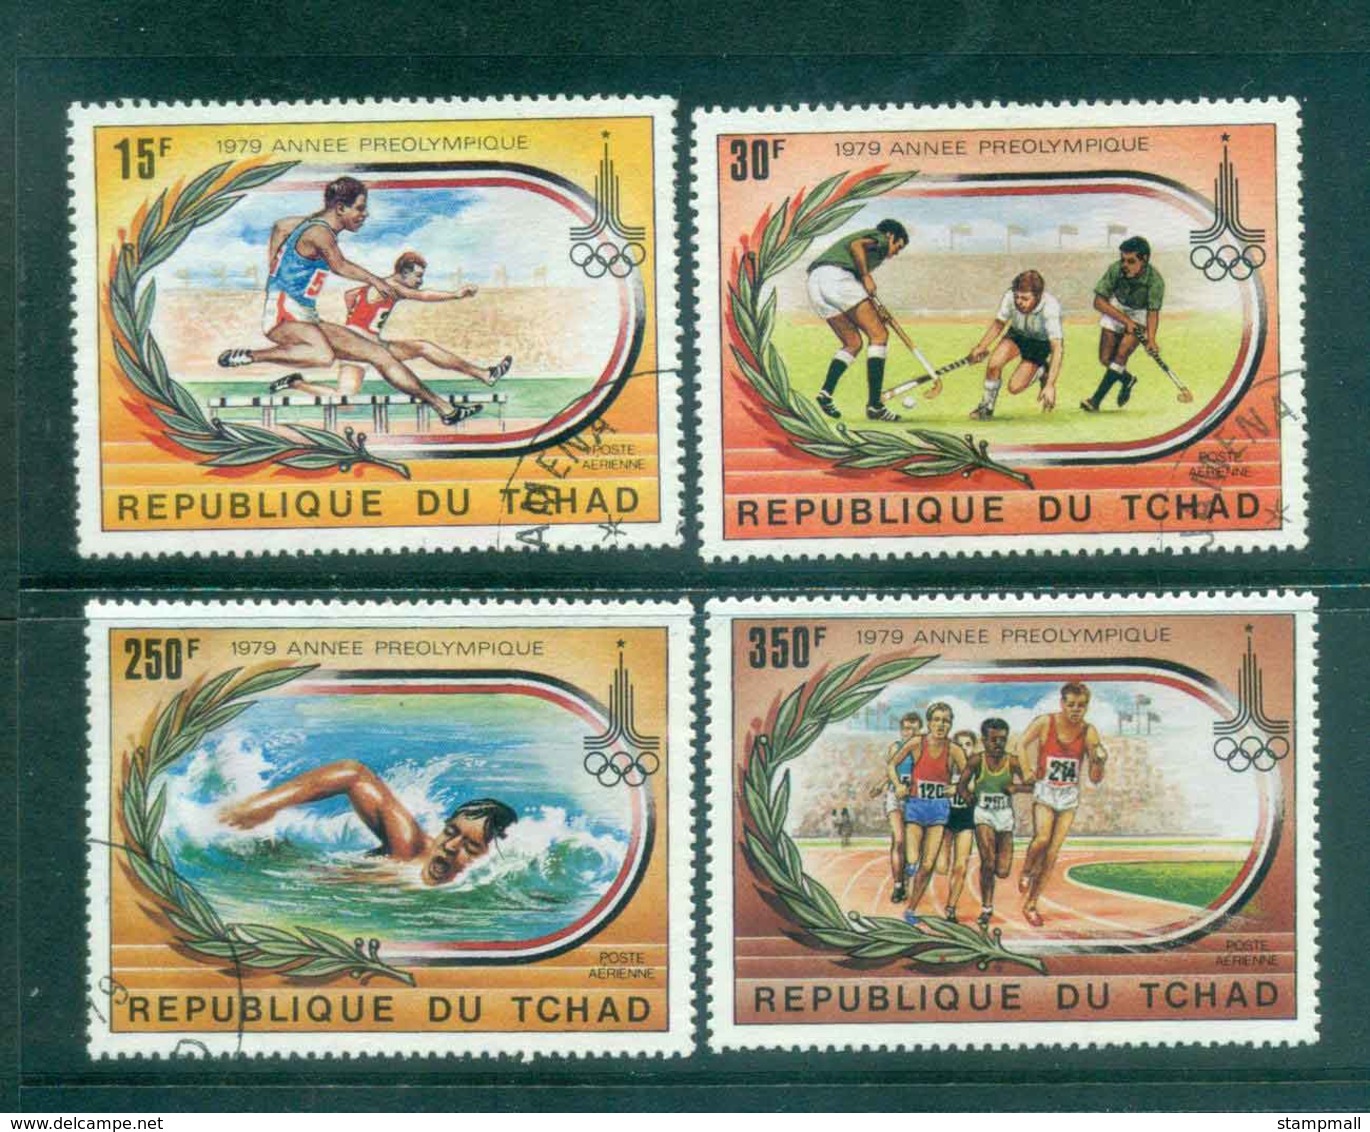 Chad 1979 Pre- Olympic Year CTO Lot46355 - Chad (1960-...)